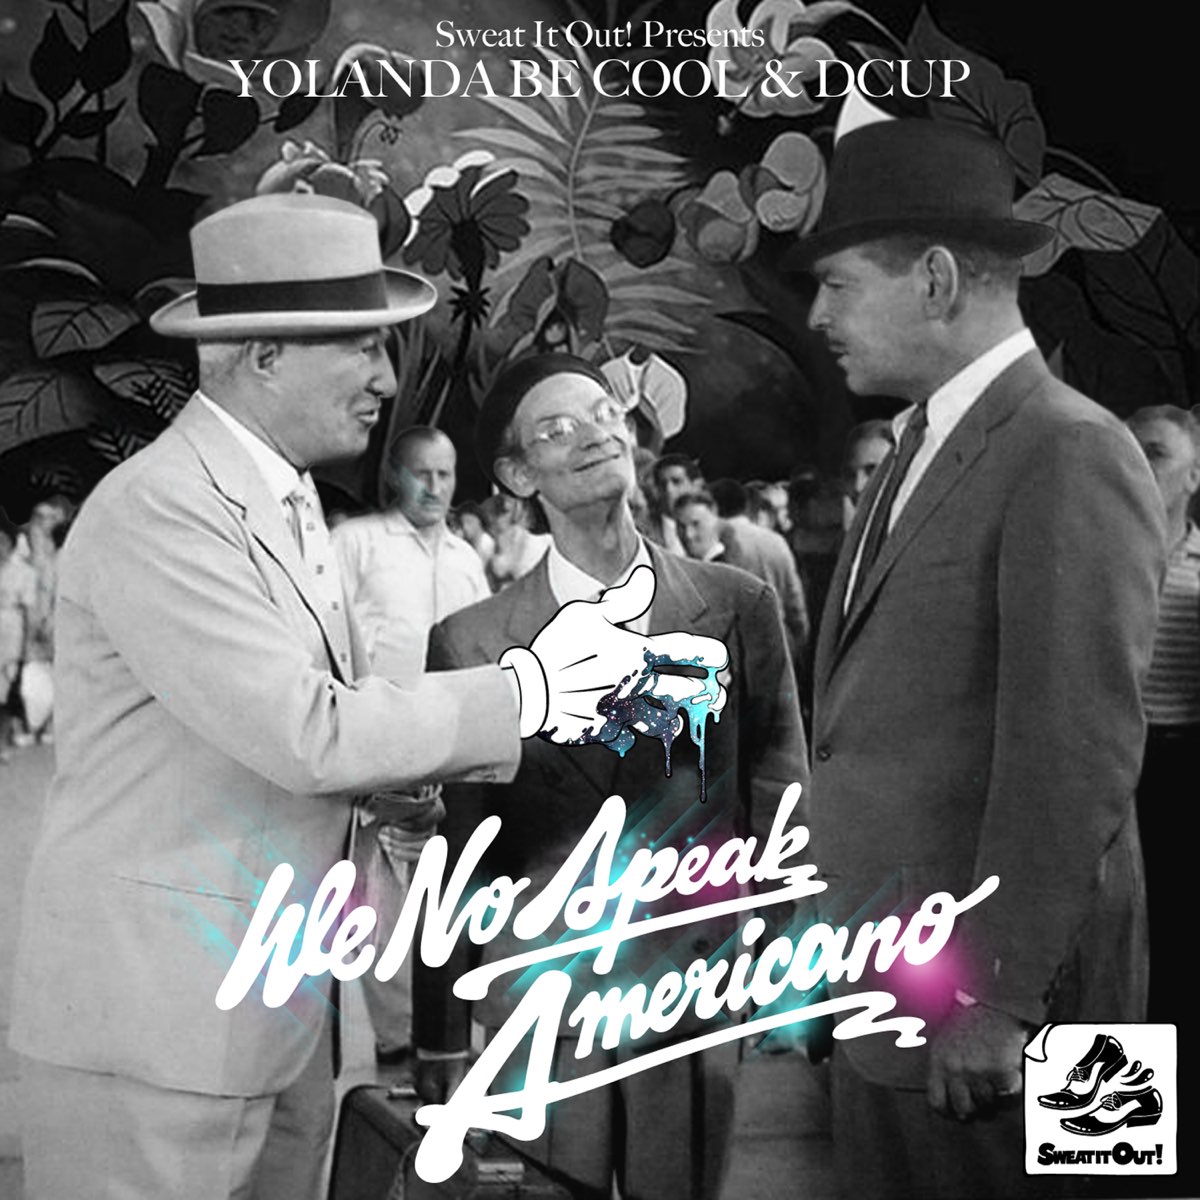 Yolanda Be Cool & D Cup - We No Speak Americano (BUSTED By